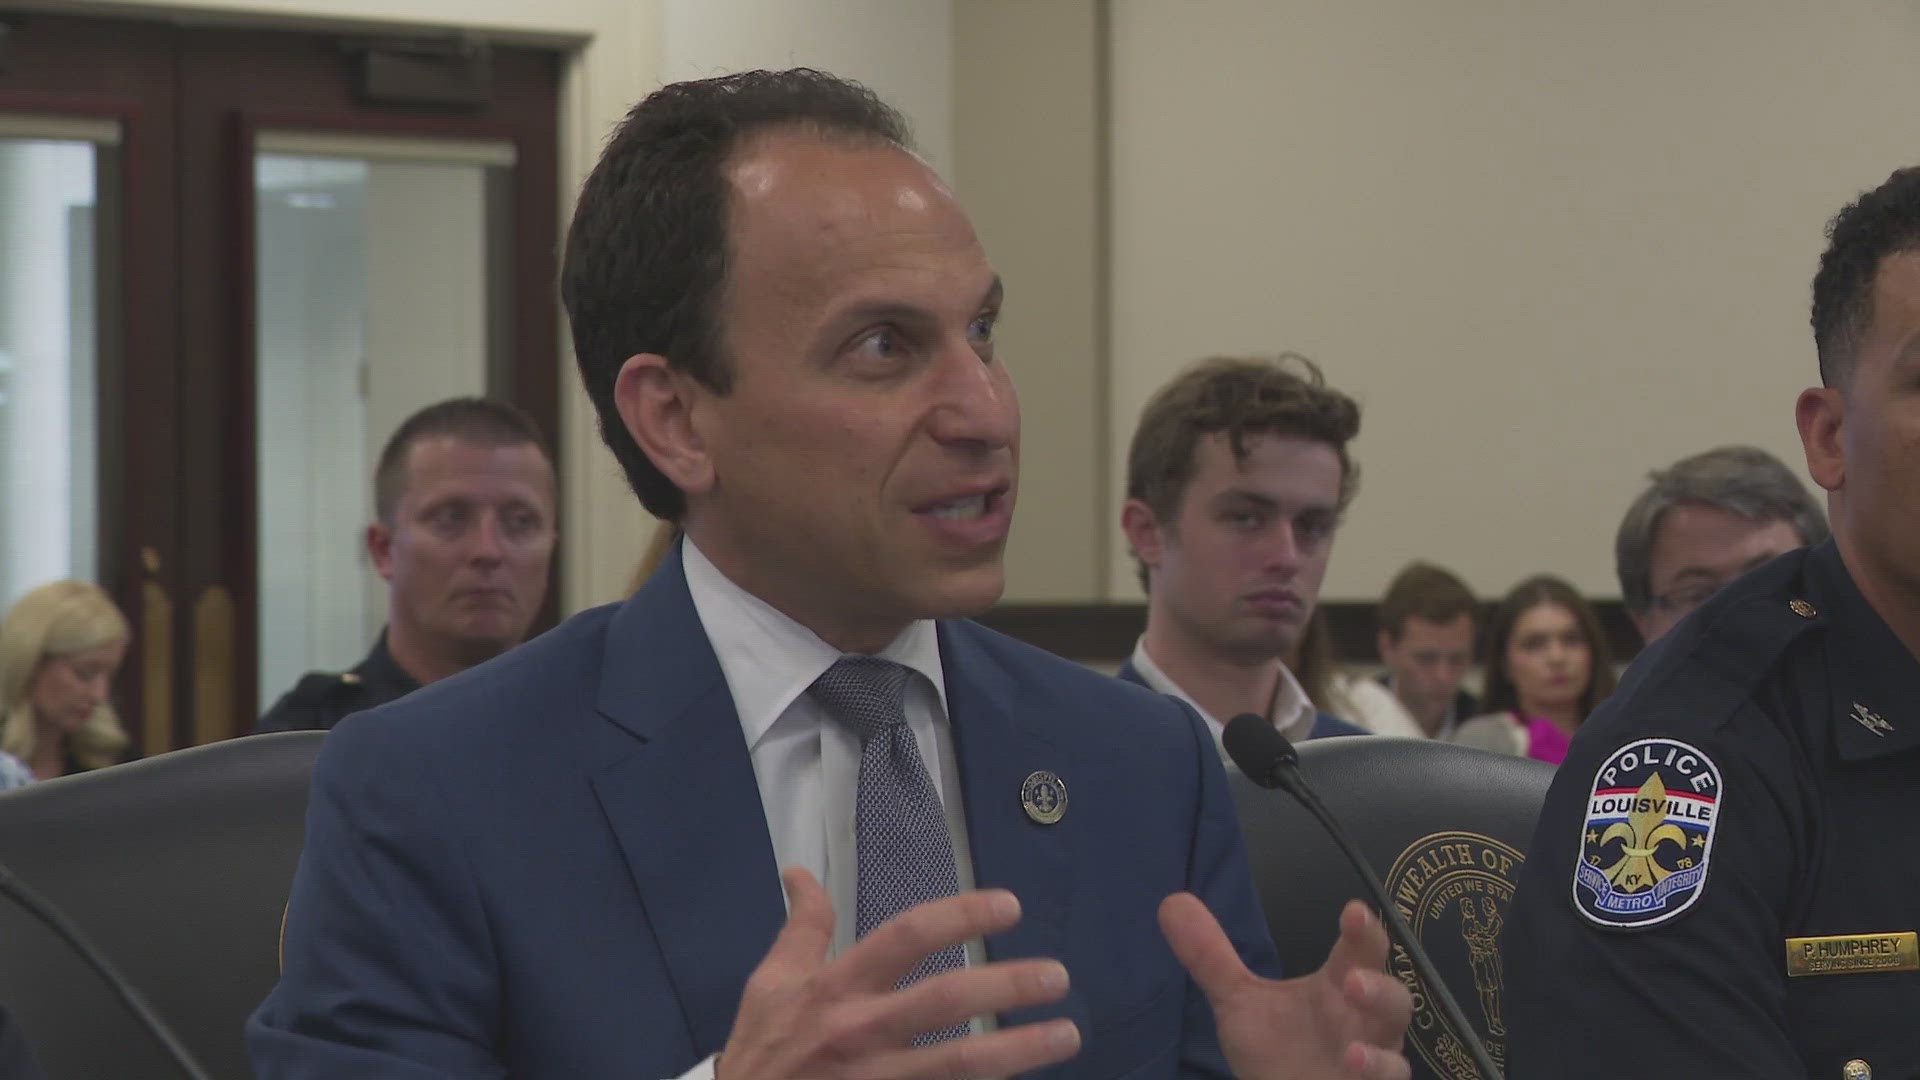 Greenberg answered questions in Frankfort about the tournament weeks after charges were dropped against pro golfer Scottie Scheffler.